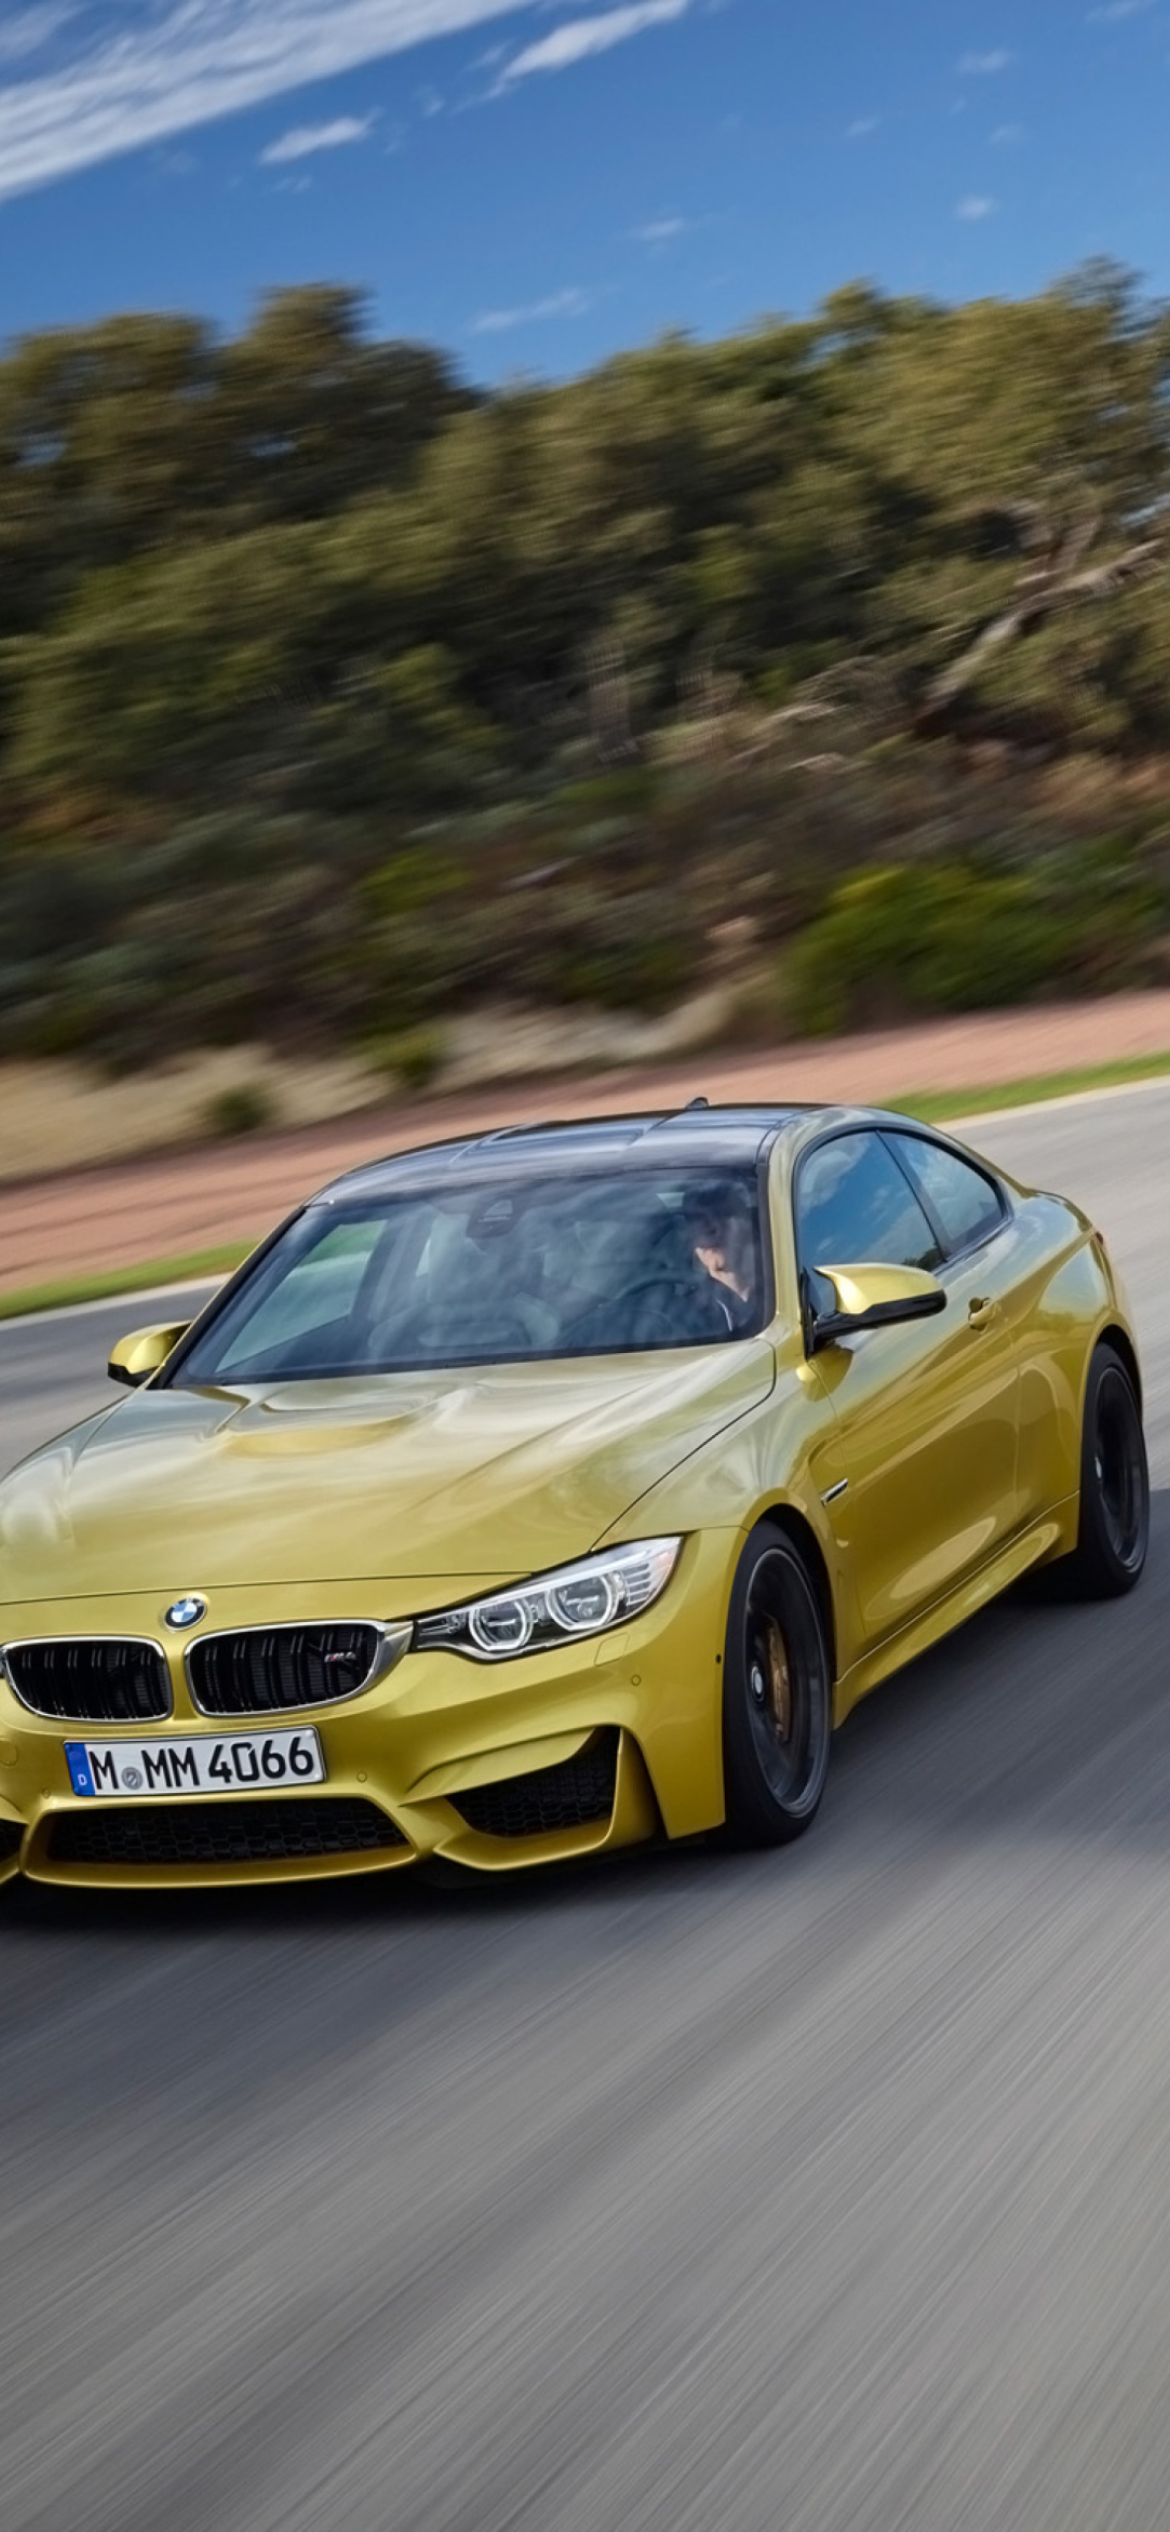 2014 BMW M4 Coupe In Motion screenshot #1 1170x2532